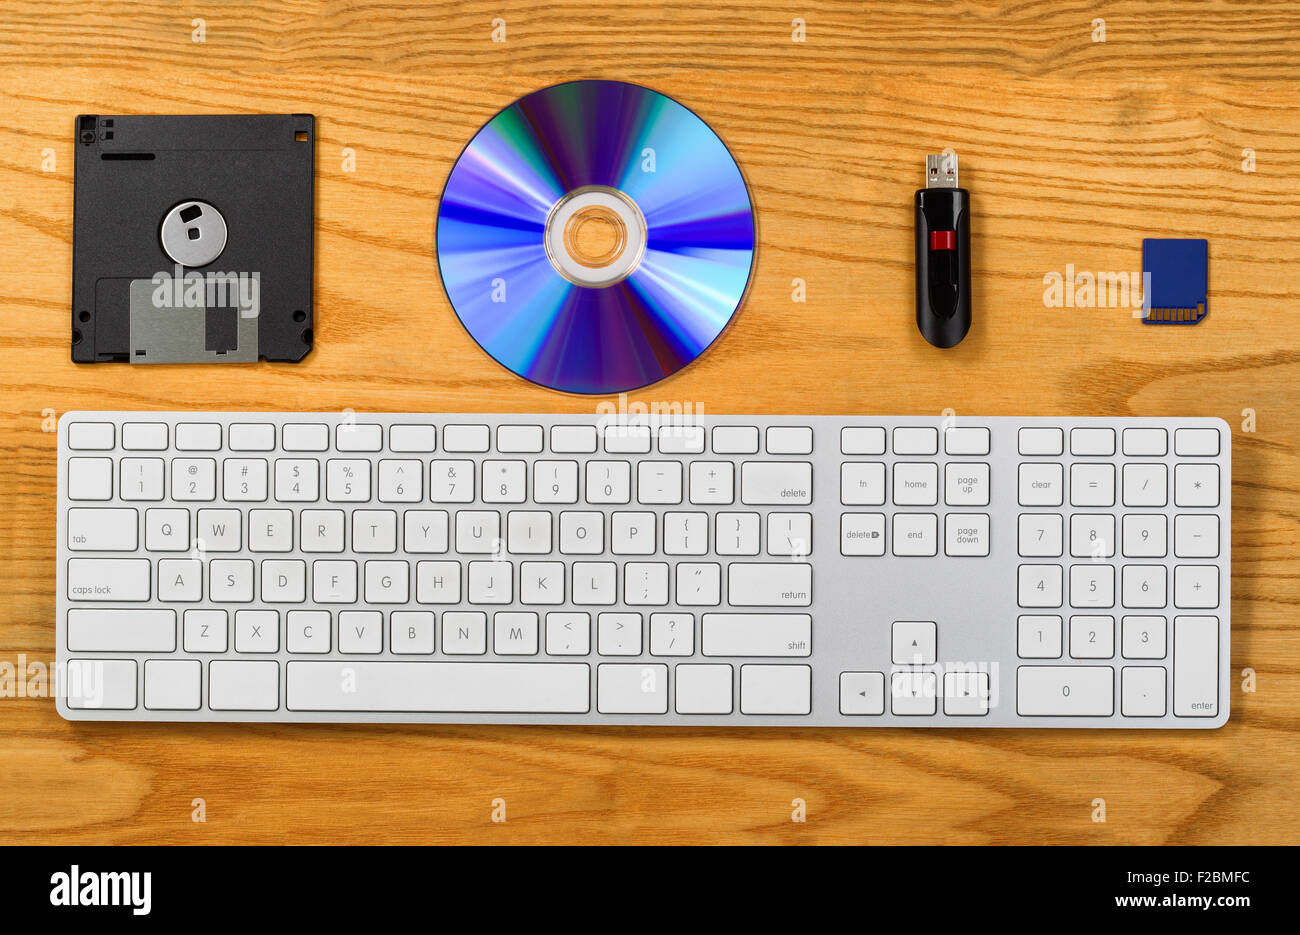 Top view of desktop with keyboard, diskette, CD, thumb drive, and Flash disk. Concept of portable data storage device Stock Photo